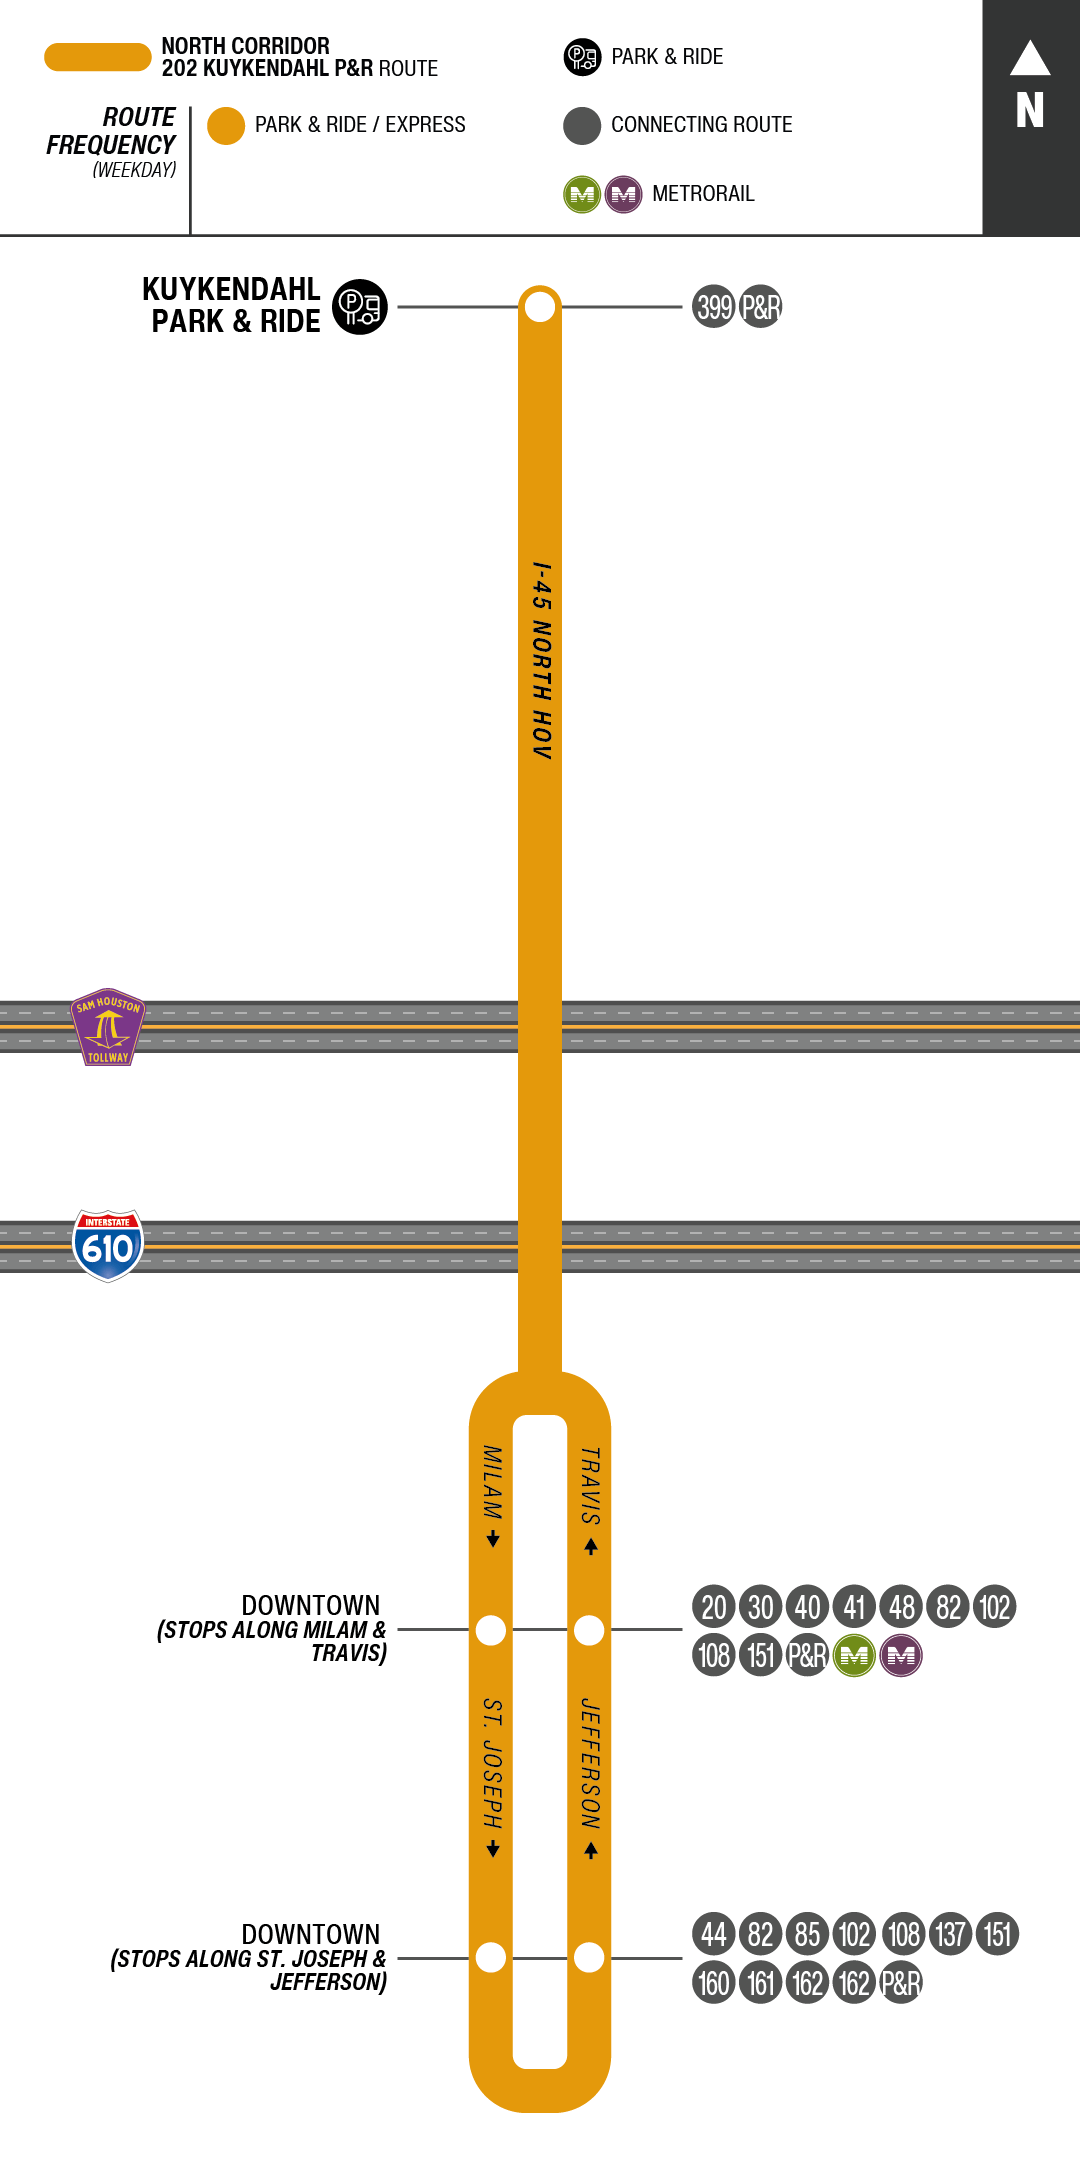 Route map for 202 Kuykendahl Park & Ride bus